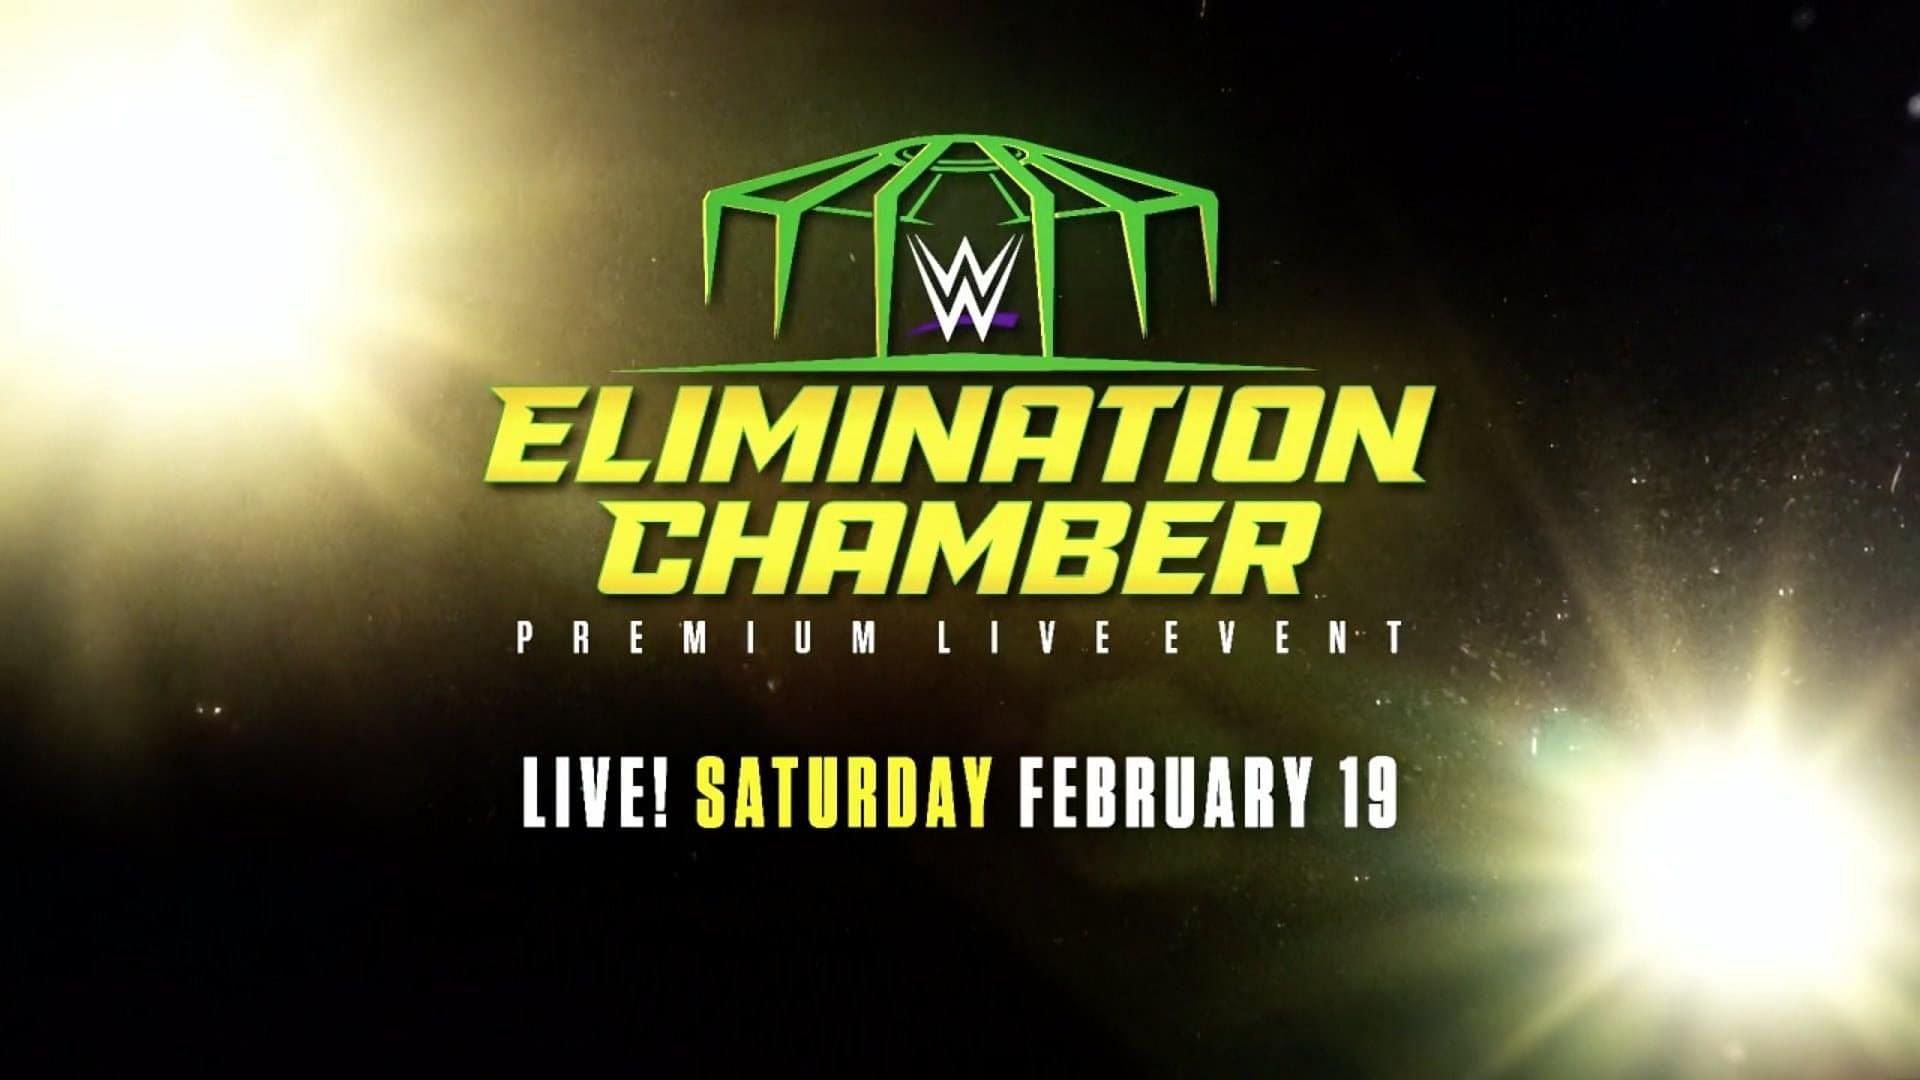 WWE is taking precautions ahead of their Elimination Chamber Premium Live Event.